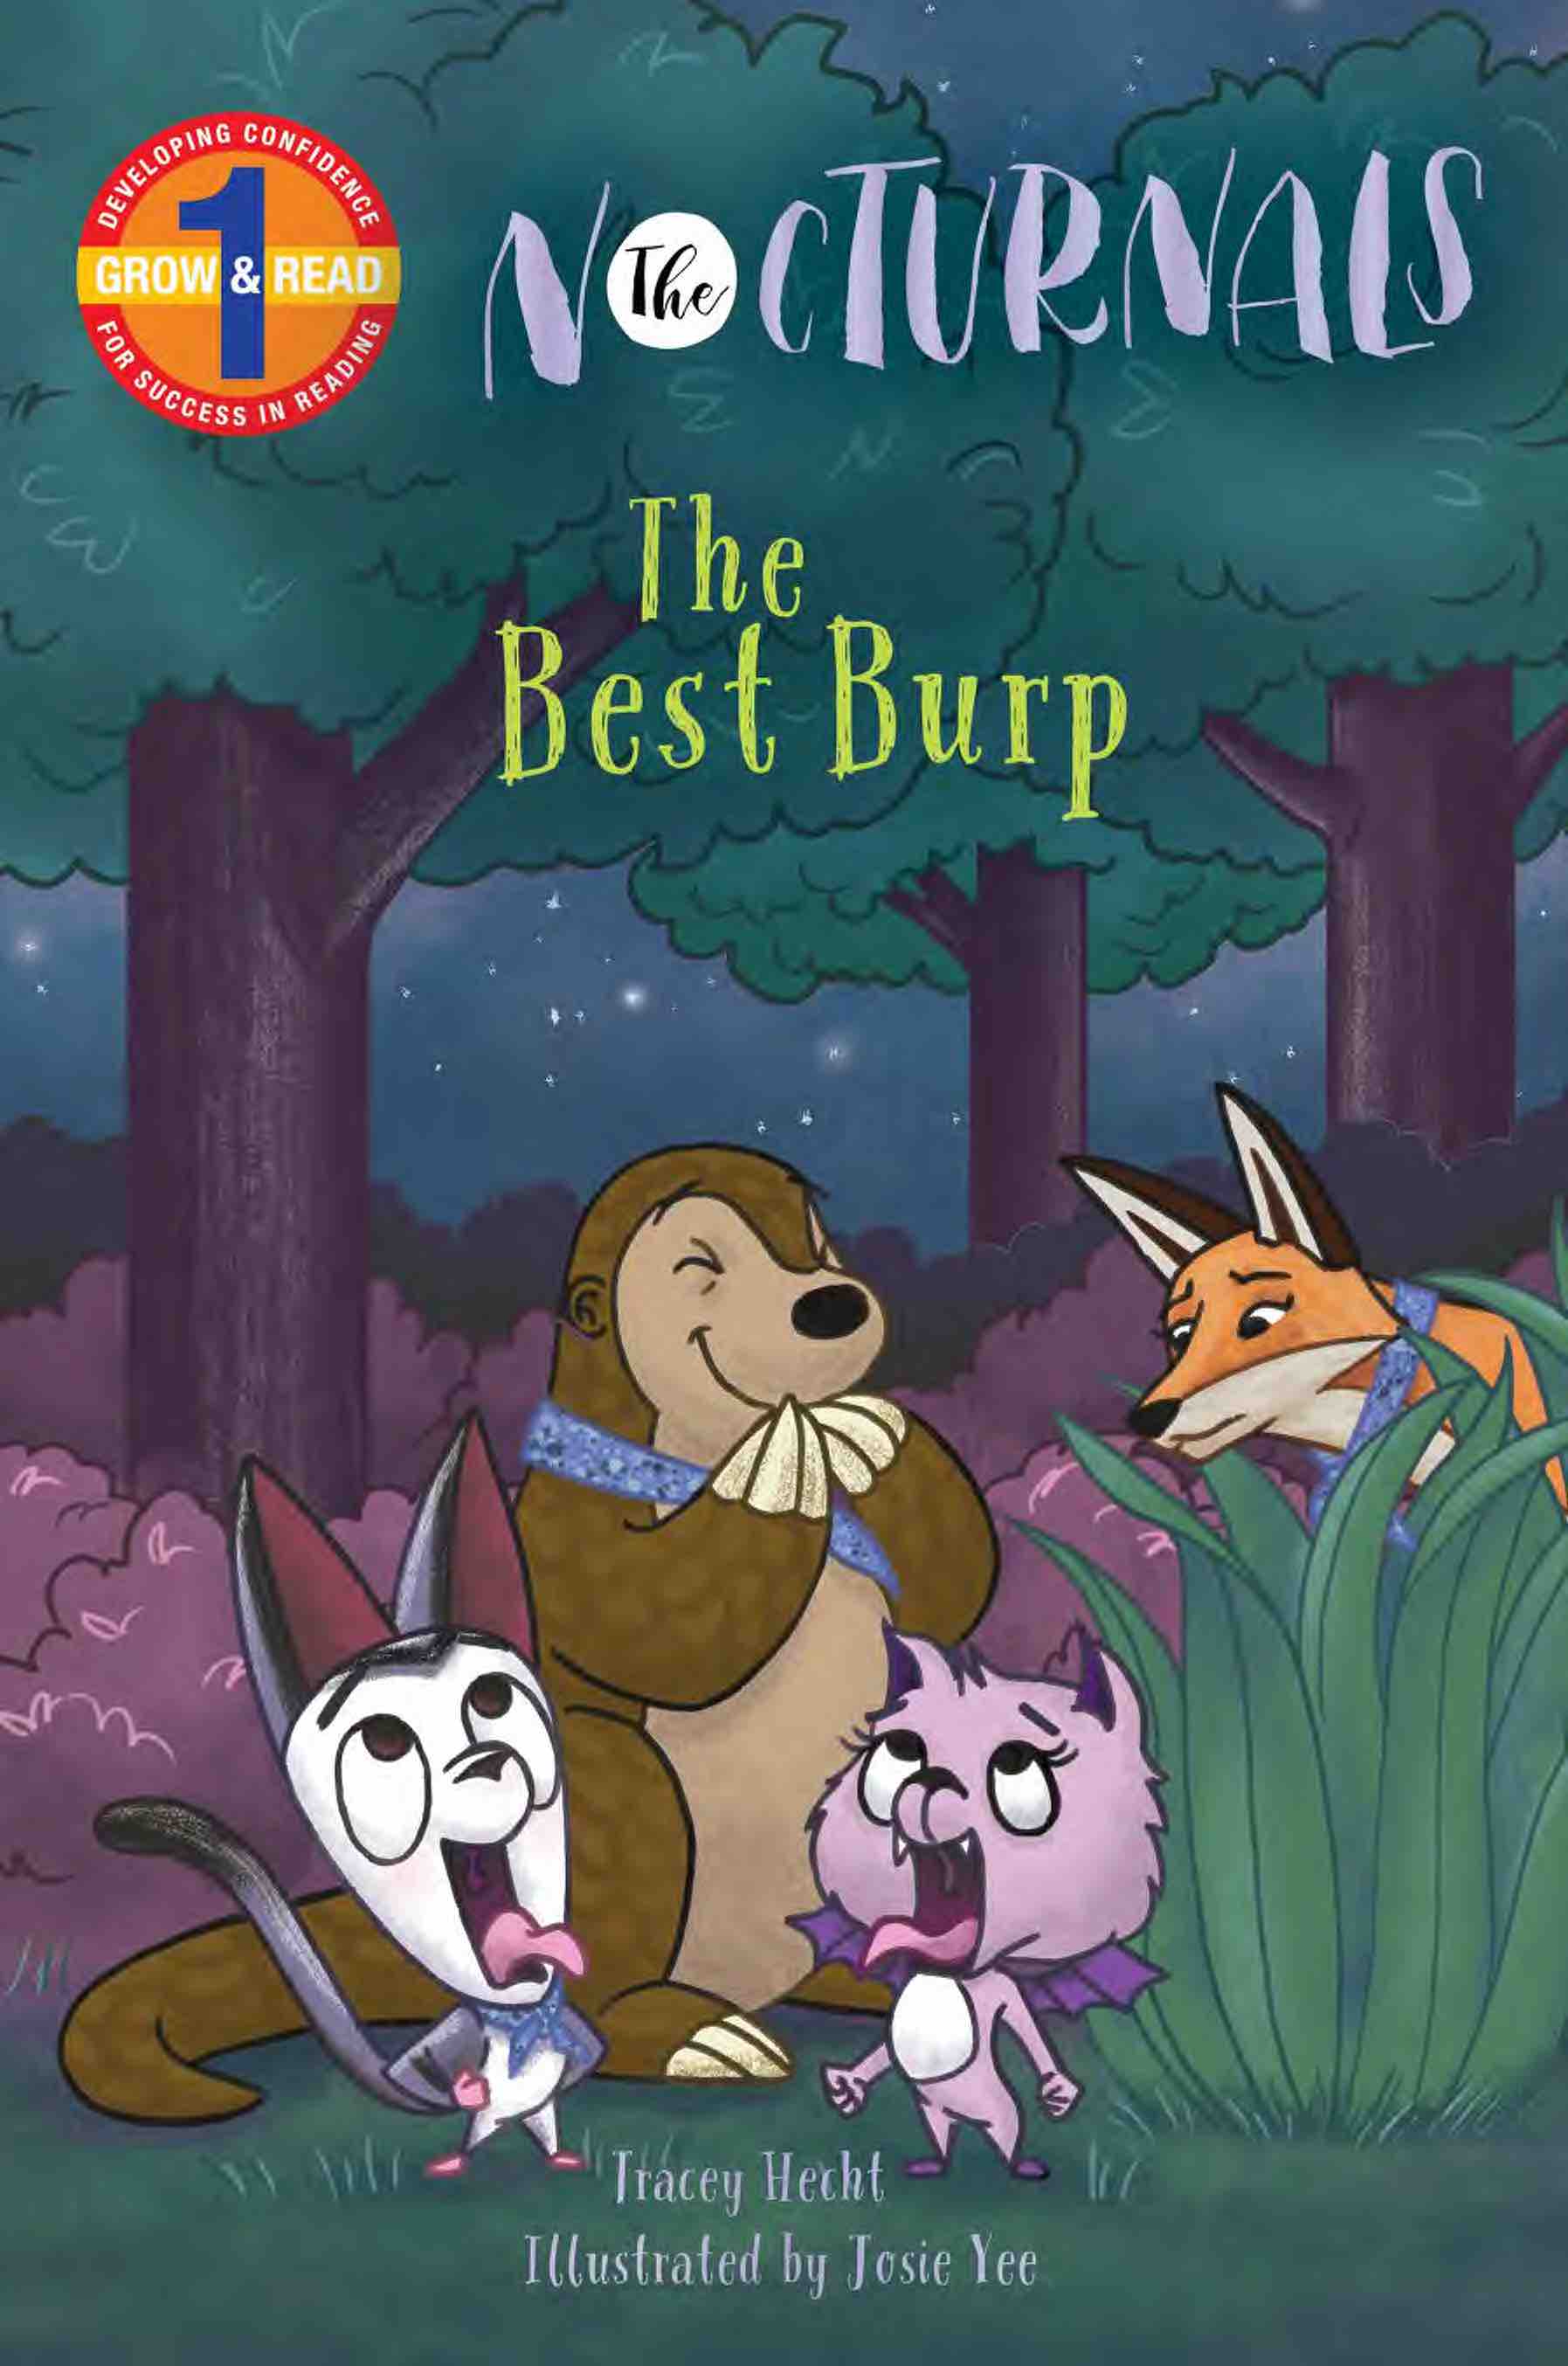 The cover of The Best Burp features Bismark, a sugar glider, and Bink, a bat, who have their mouths open with their tongues sticking out. Tobin, a pangolin, is smiling with his paws over his mouth, and Dawn, a fox, is hiding behind a bush looking at everyone. 